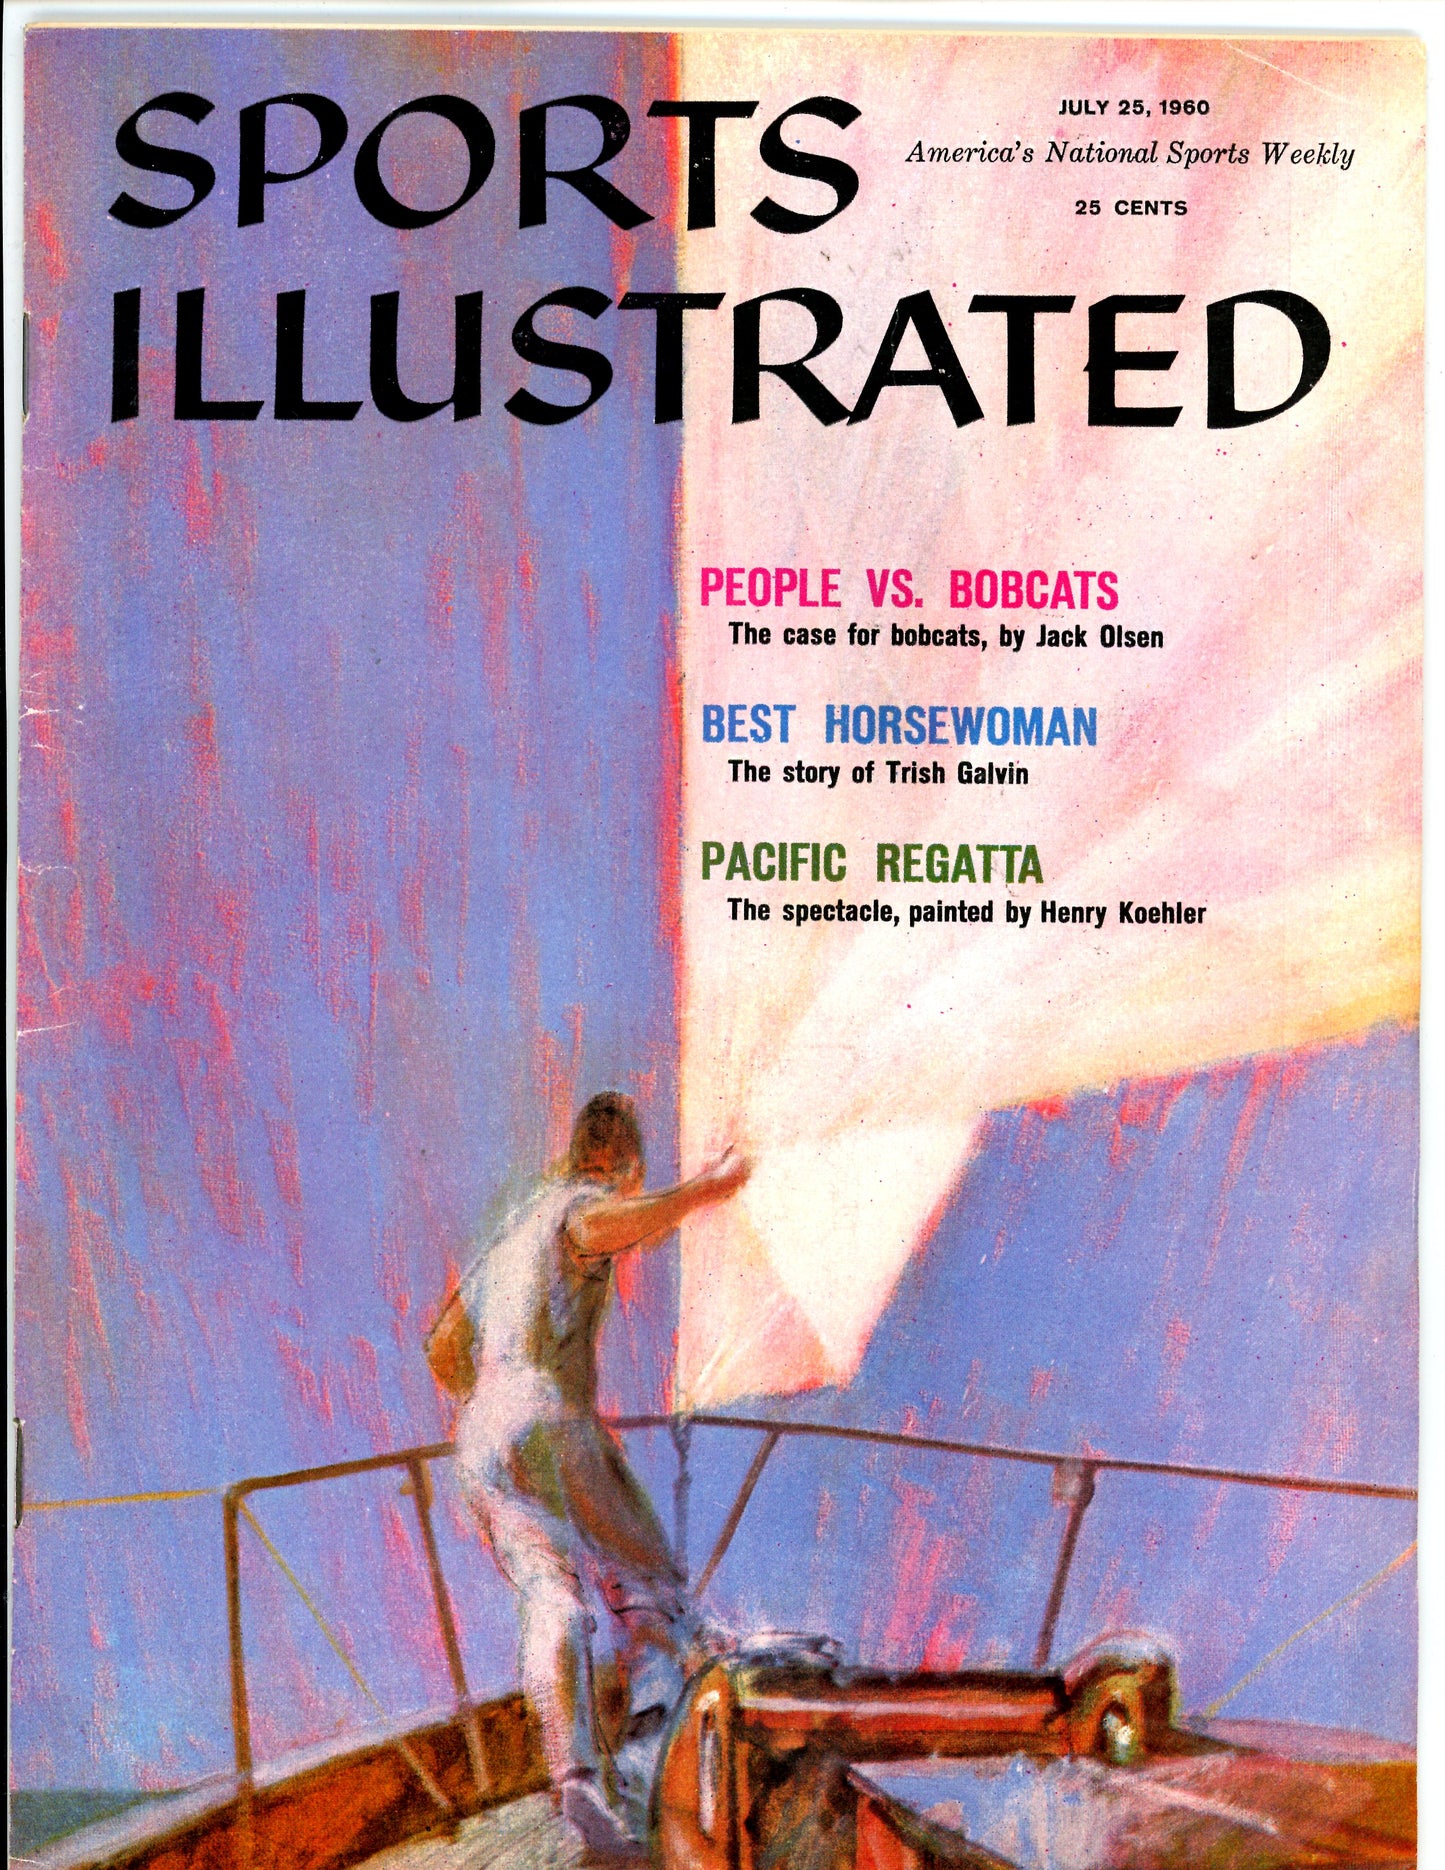 Sports Illustrated Vintage Magazine Rare Newsstand Edition (July 25, 1960) Sailing, Boating